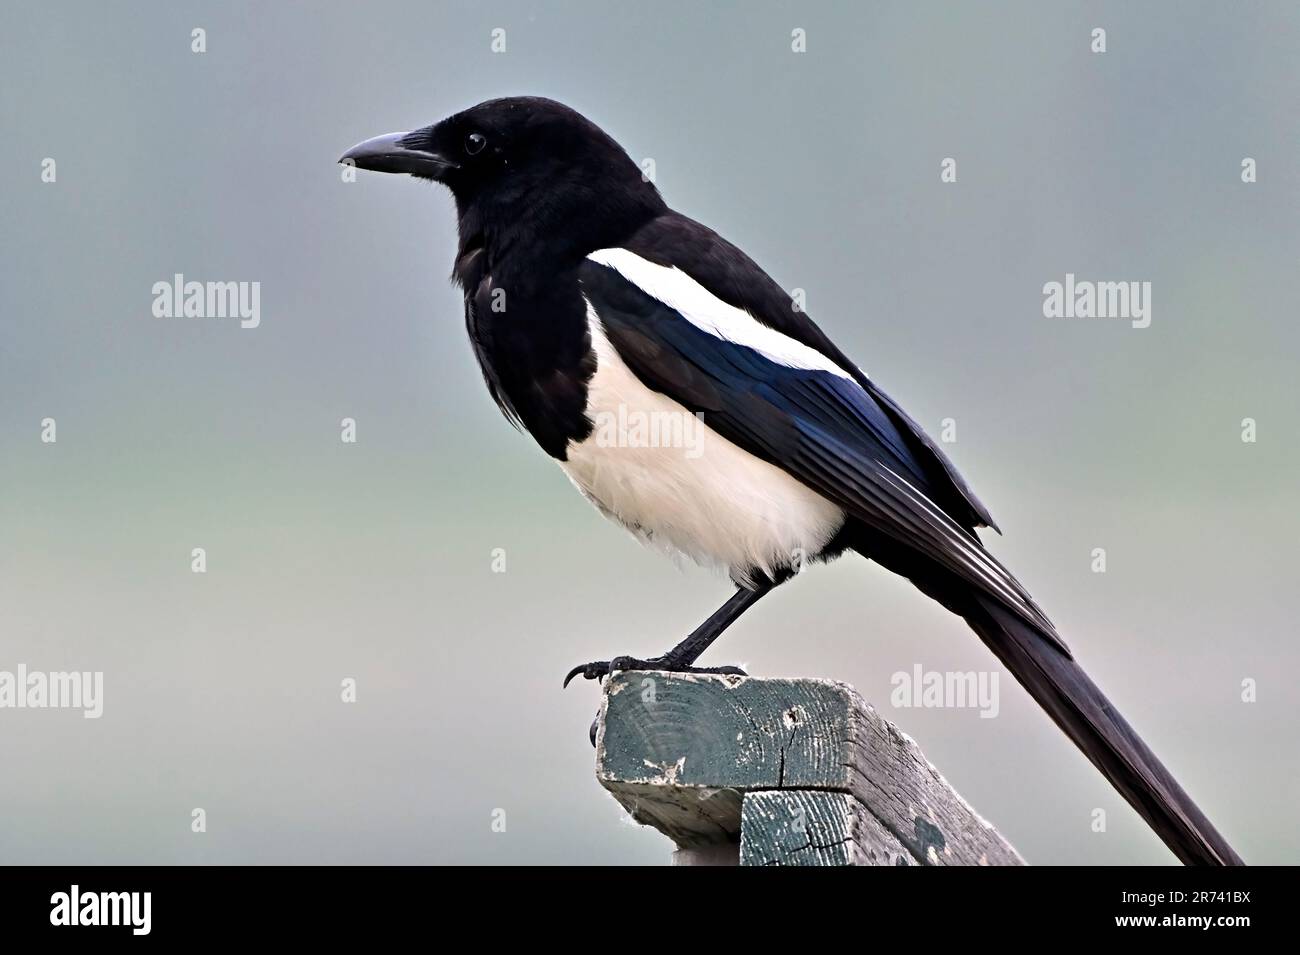 A Black-billed Magpie 'Pica pica', perched on an outdoor railing. Stock Photo